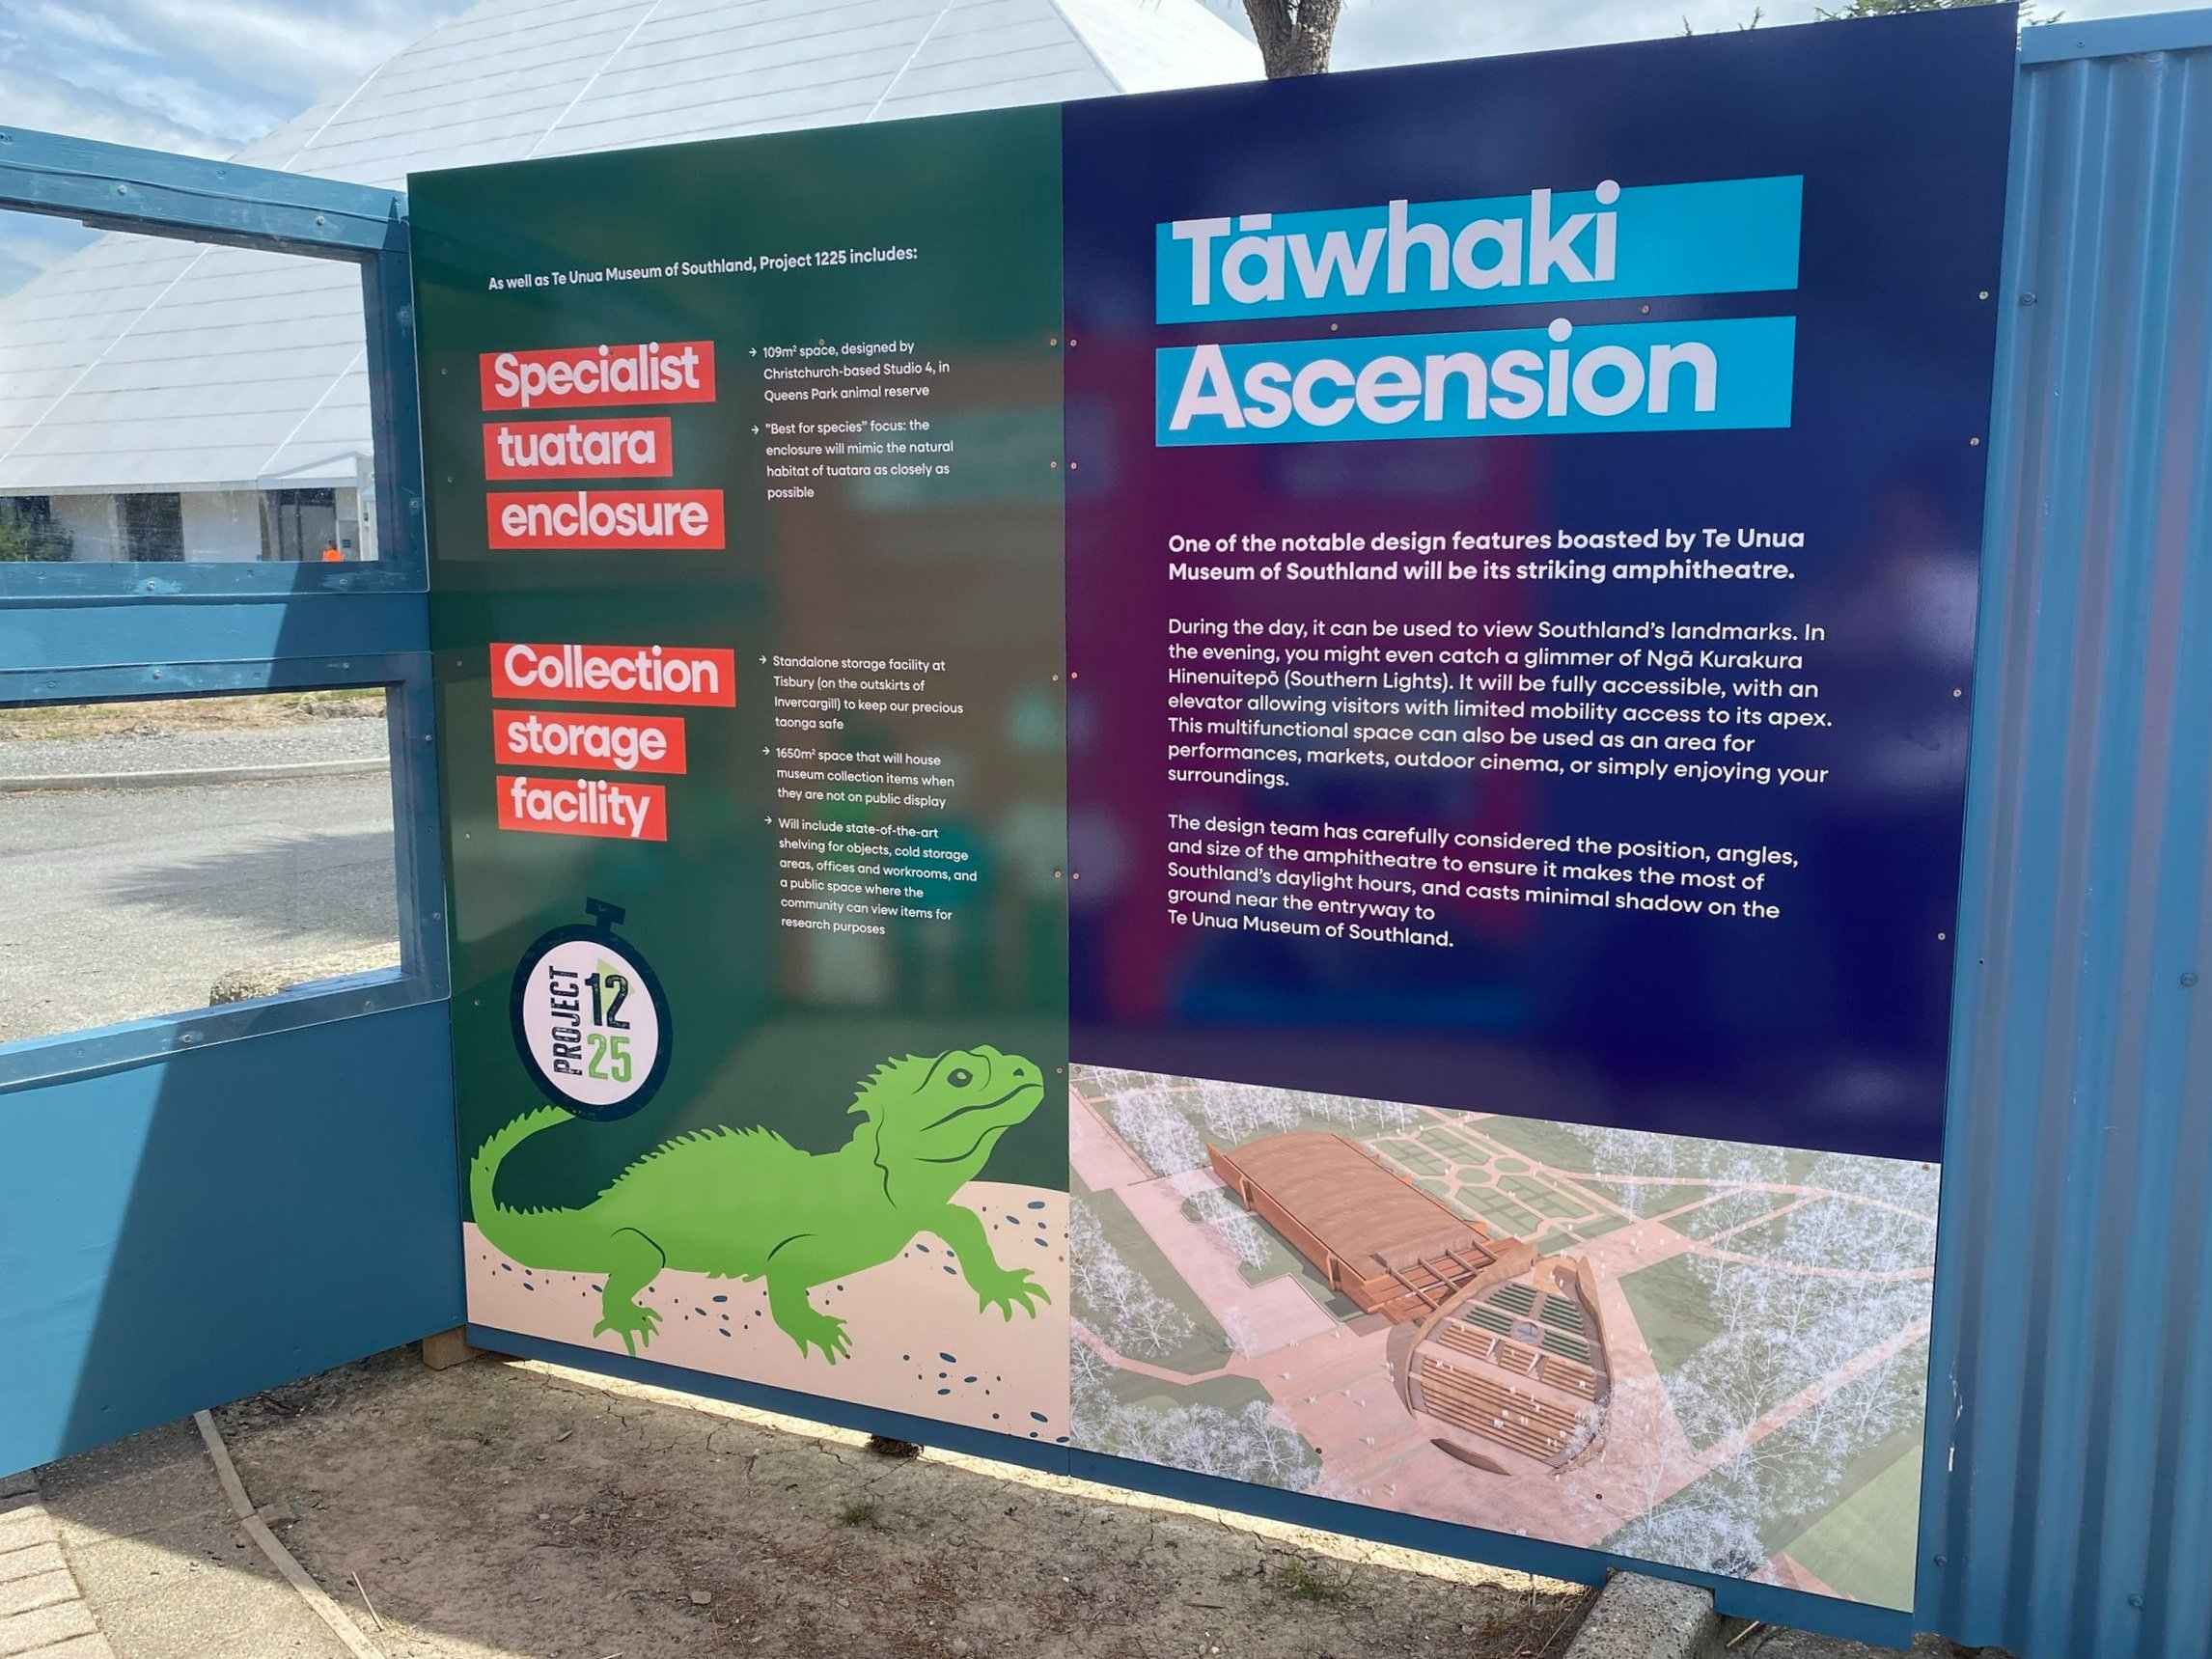  Each storytelling sign reflects key information relating to that location - for example, this sign overlooks where the outdoor amphitheatre will be constructed 